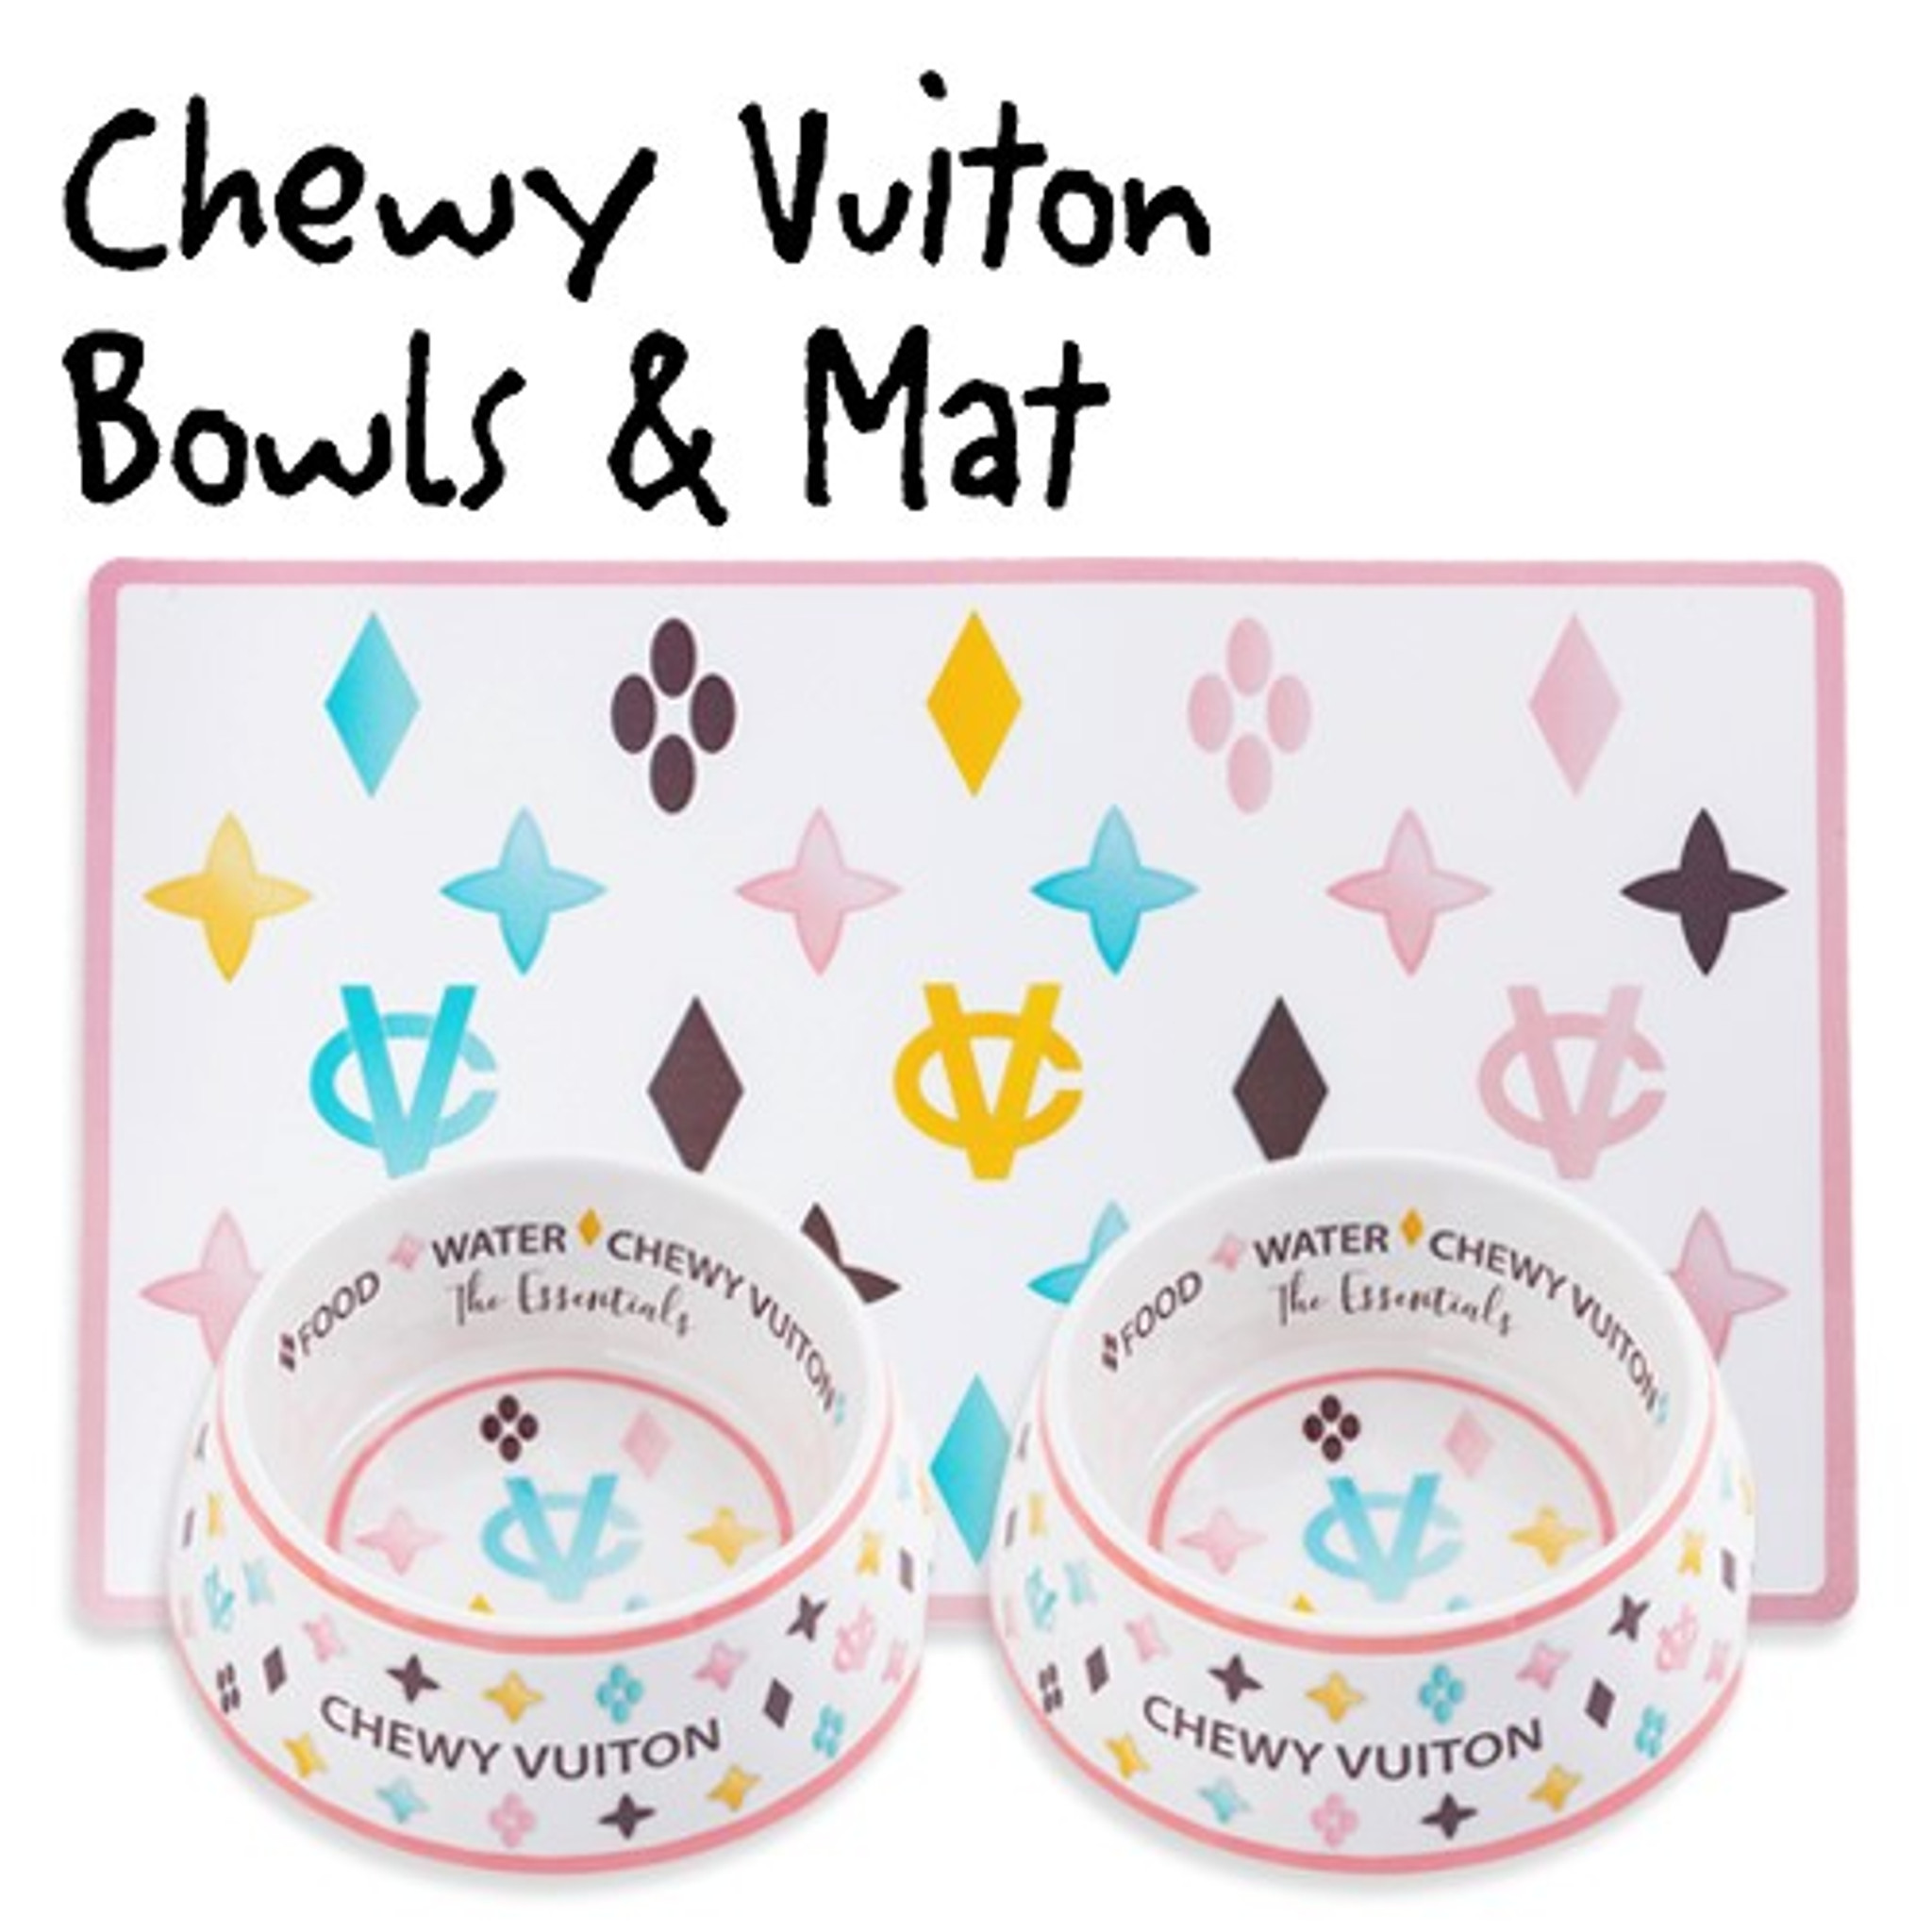 White Chewy Vuiton — Two Bostons